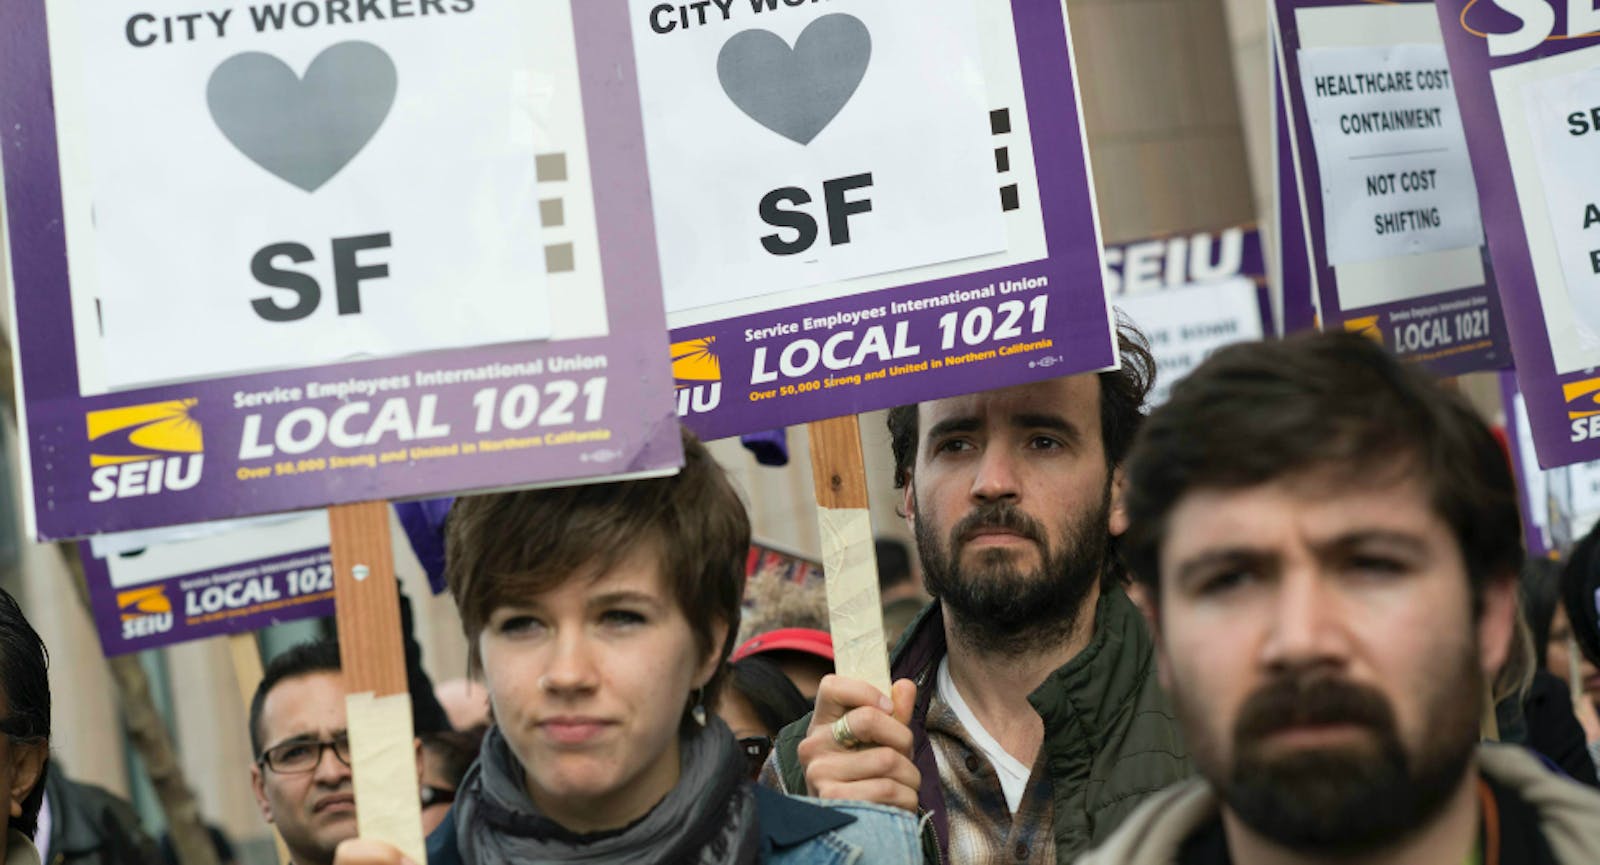 Union workers protesting at Twitter in San Francisco. Photo by Bloomberg.